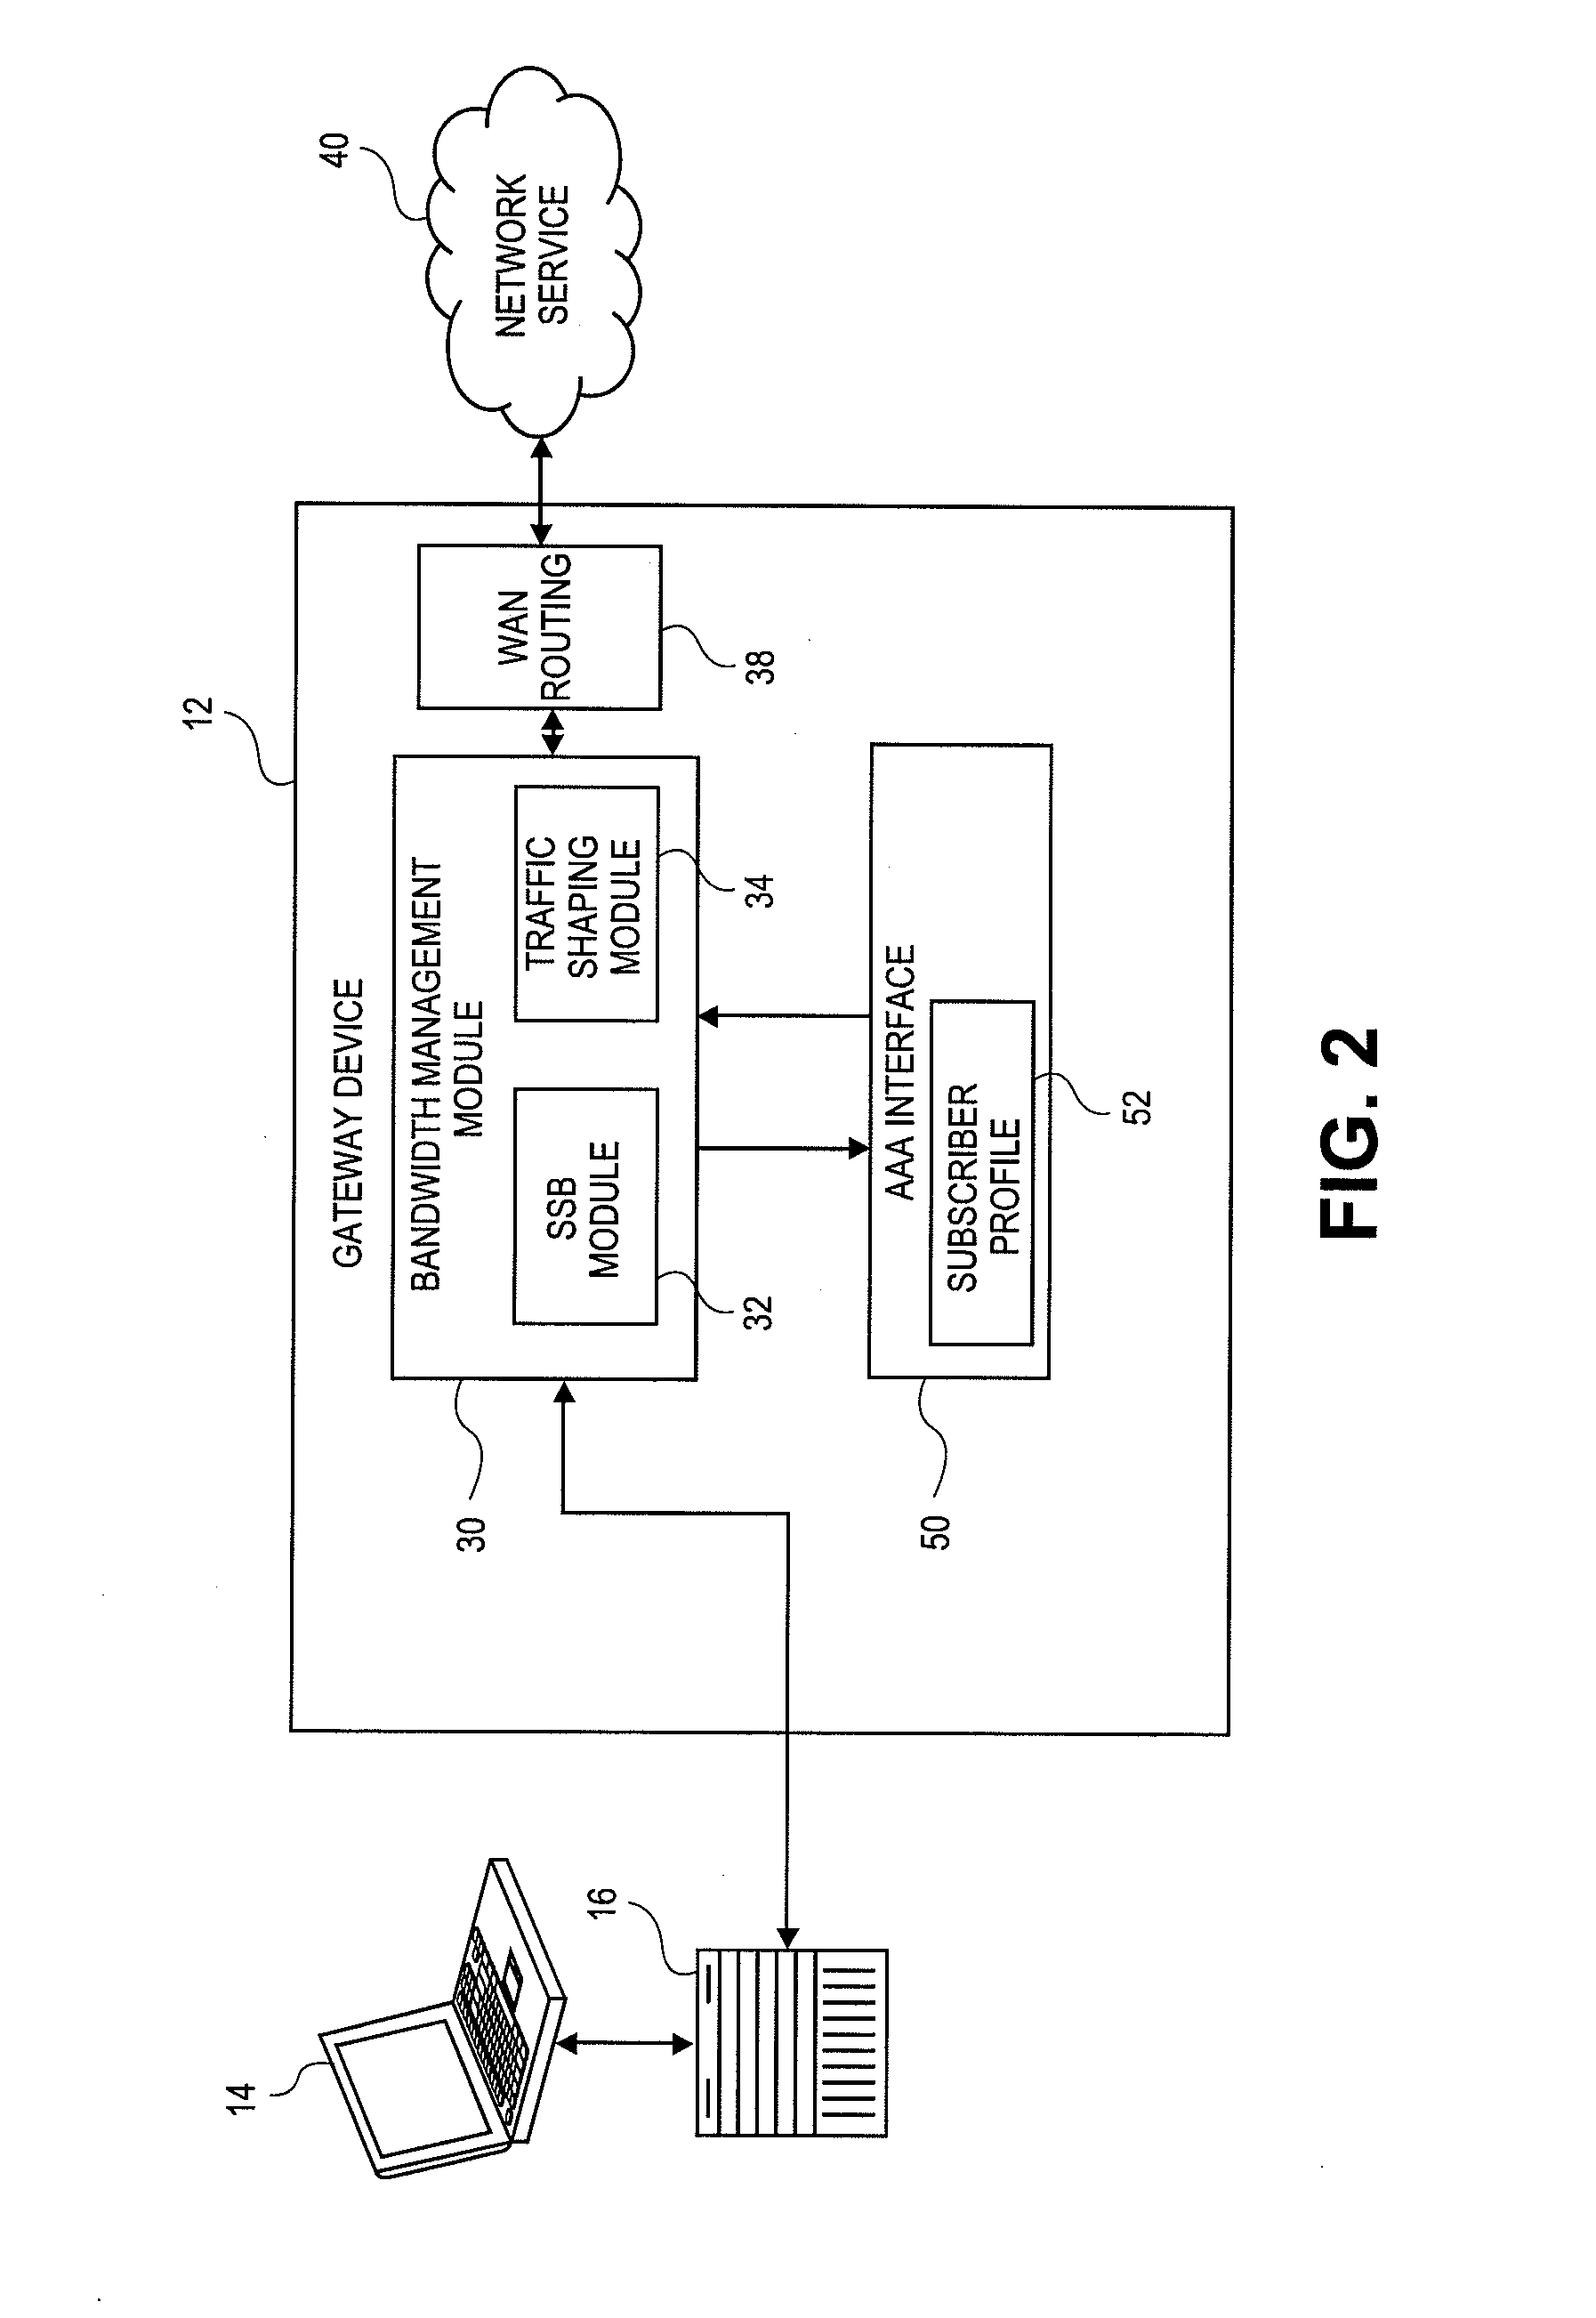 Systems and methods for dynamic bandwidth management on a per subscriber basis in a communications network